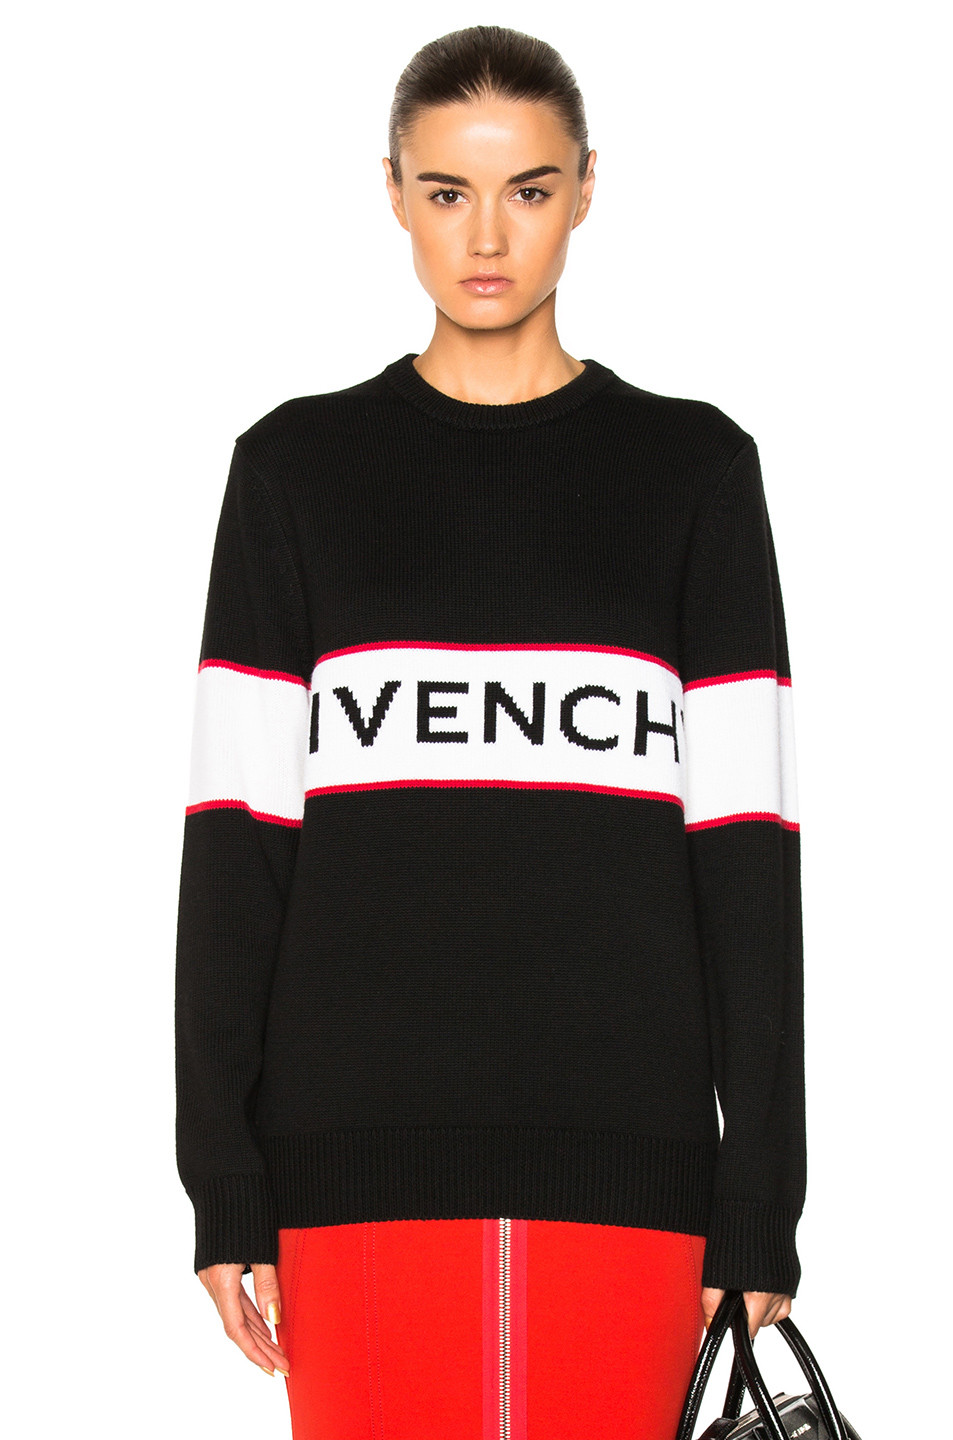 Givenchy Logo Knit Sweater in Black